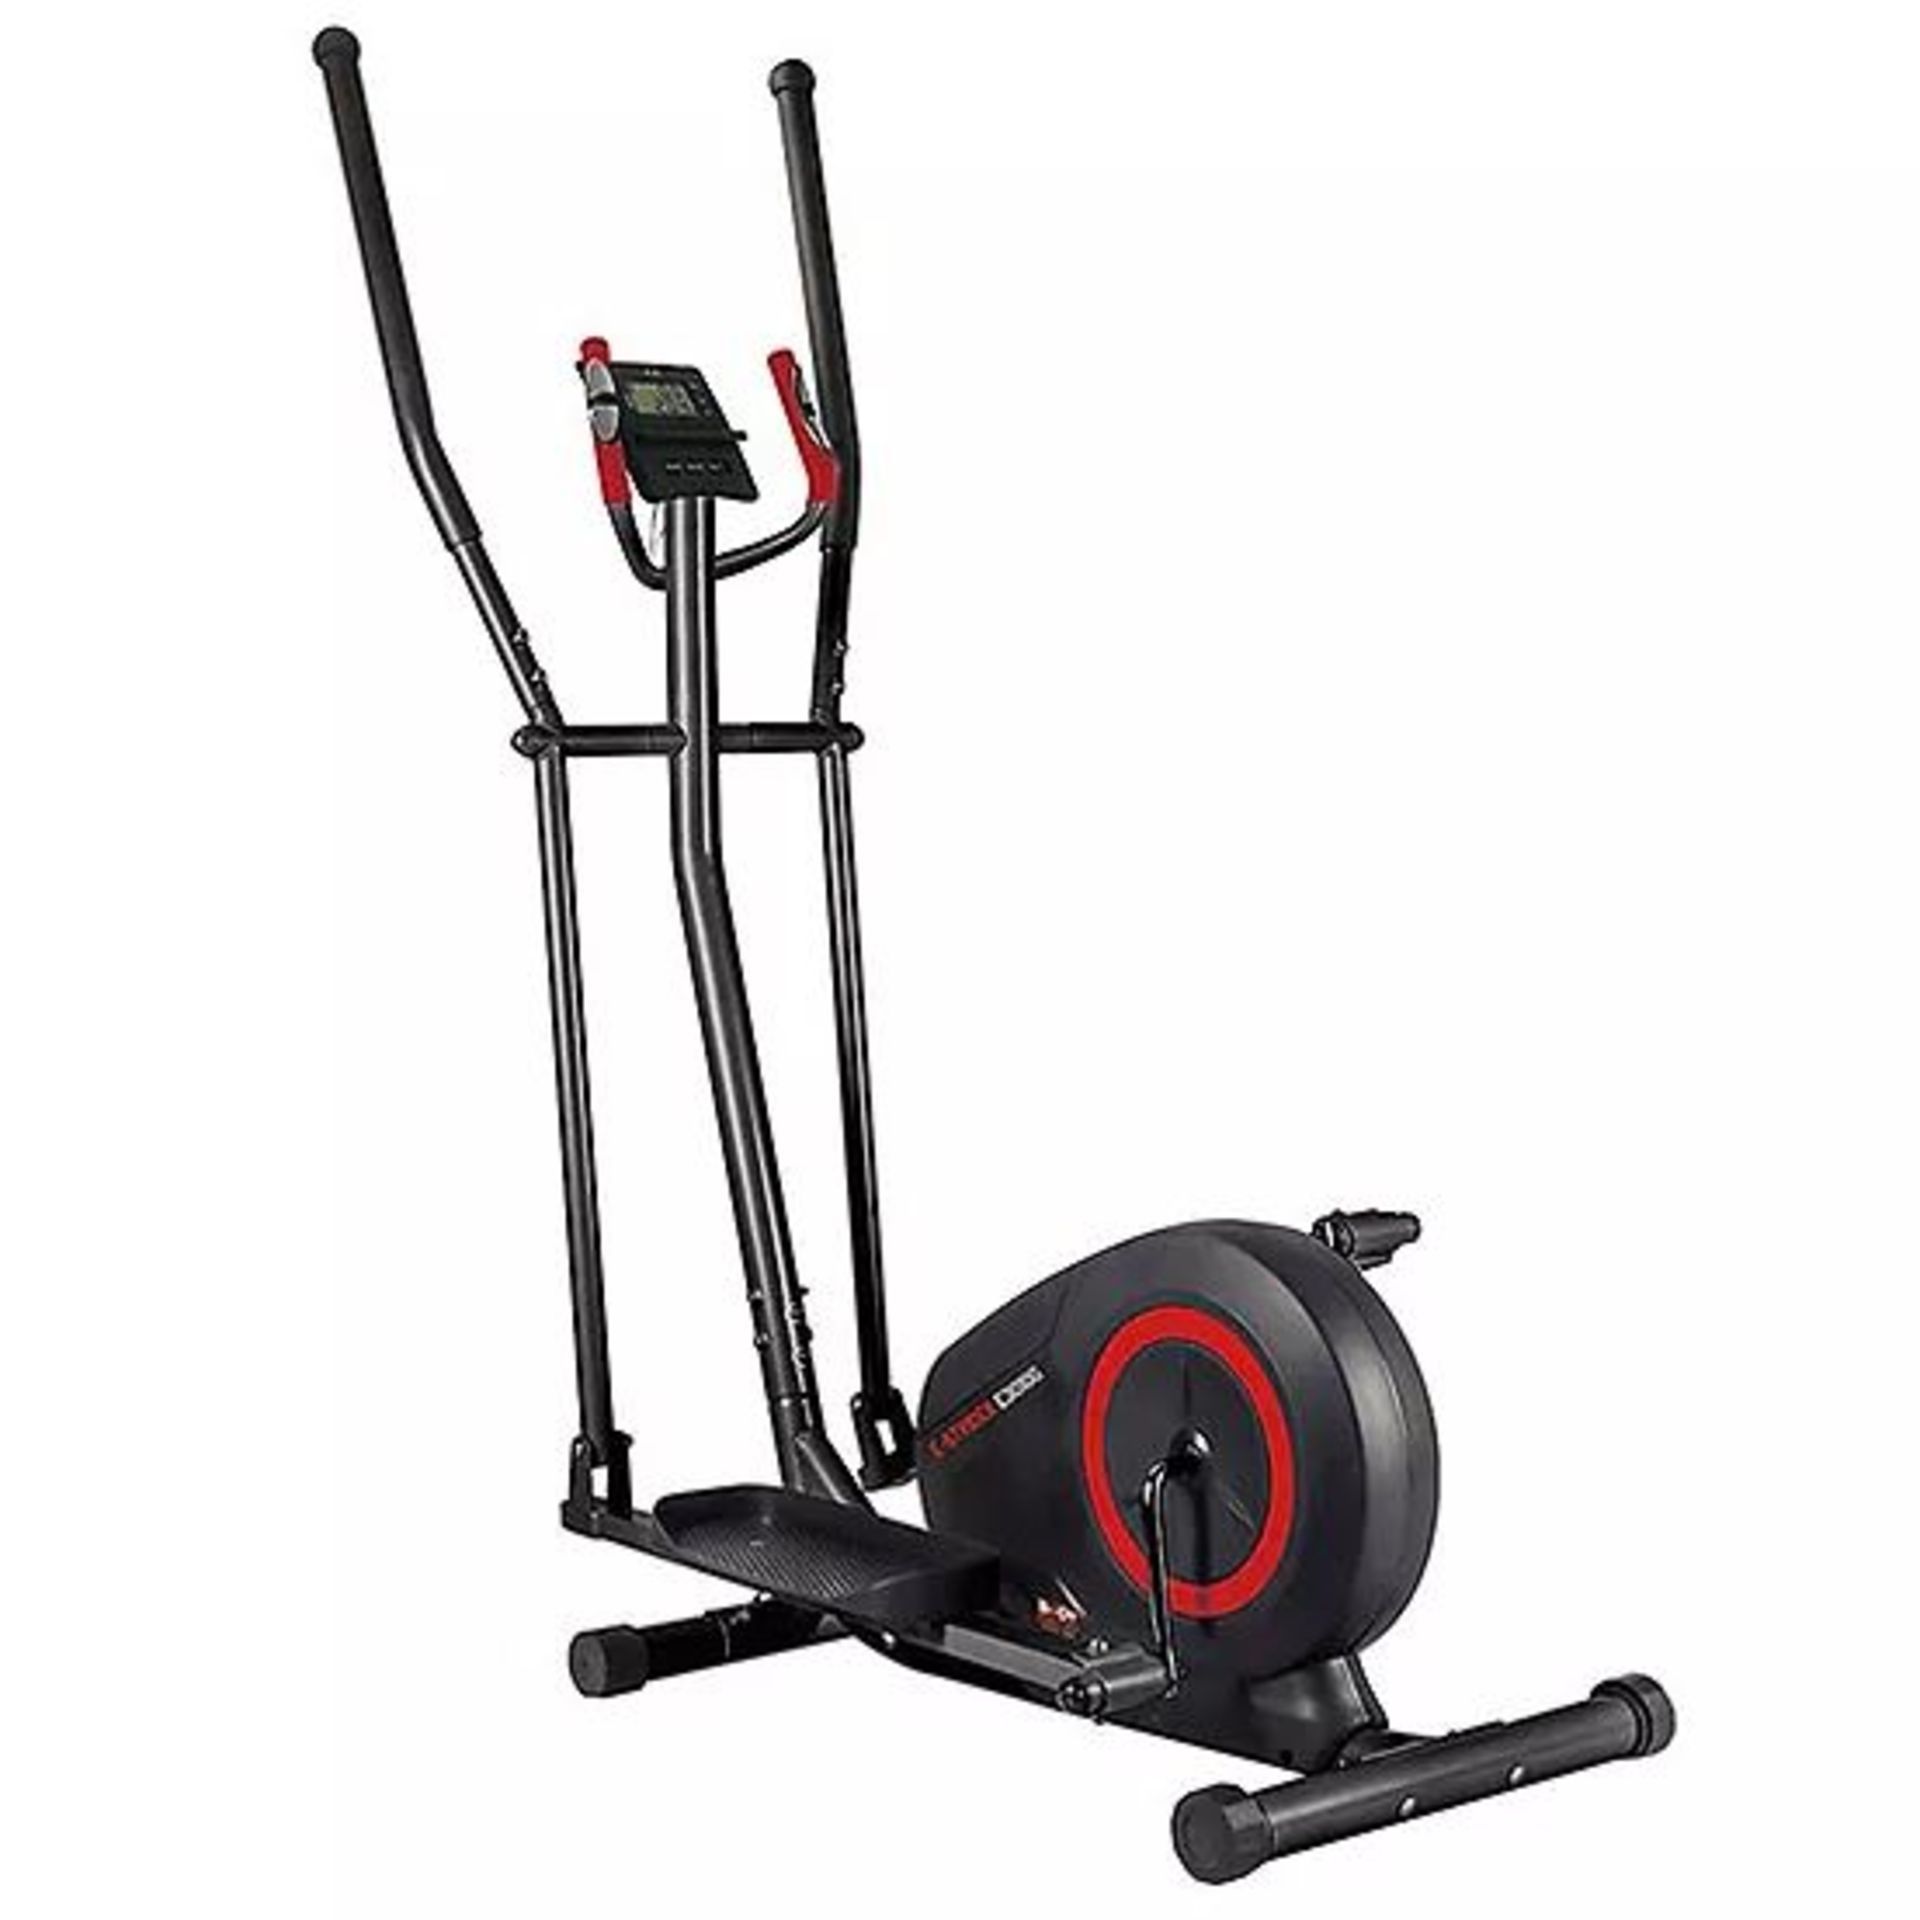 PALLET TO INCLUDE 5 X NEW & BOXED BODY SCULPTURE Programmable Cross Trainer. RRP £229.99. The Body